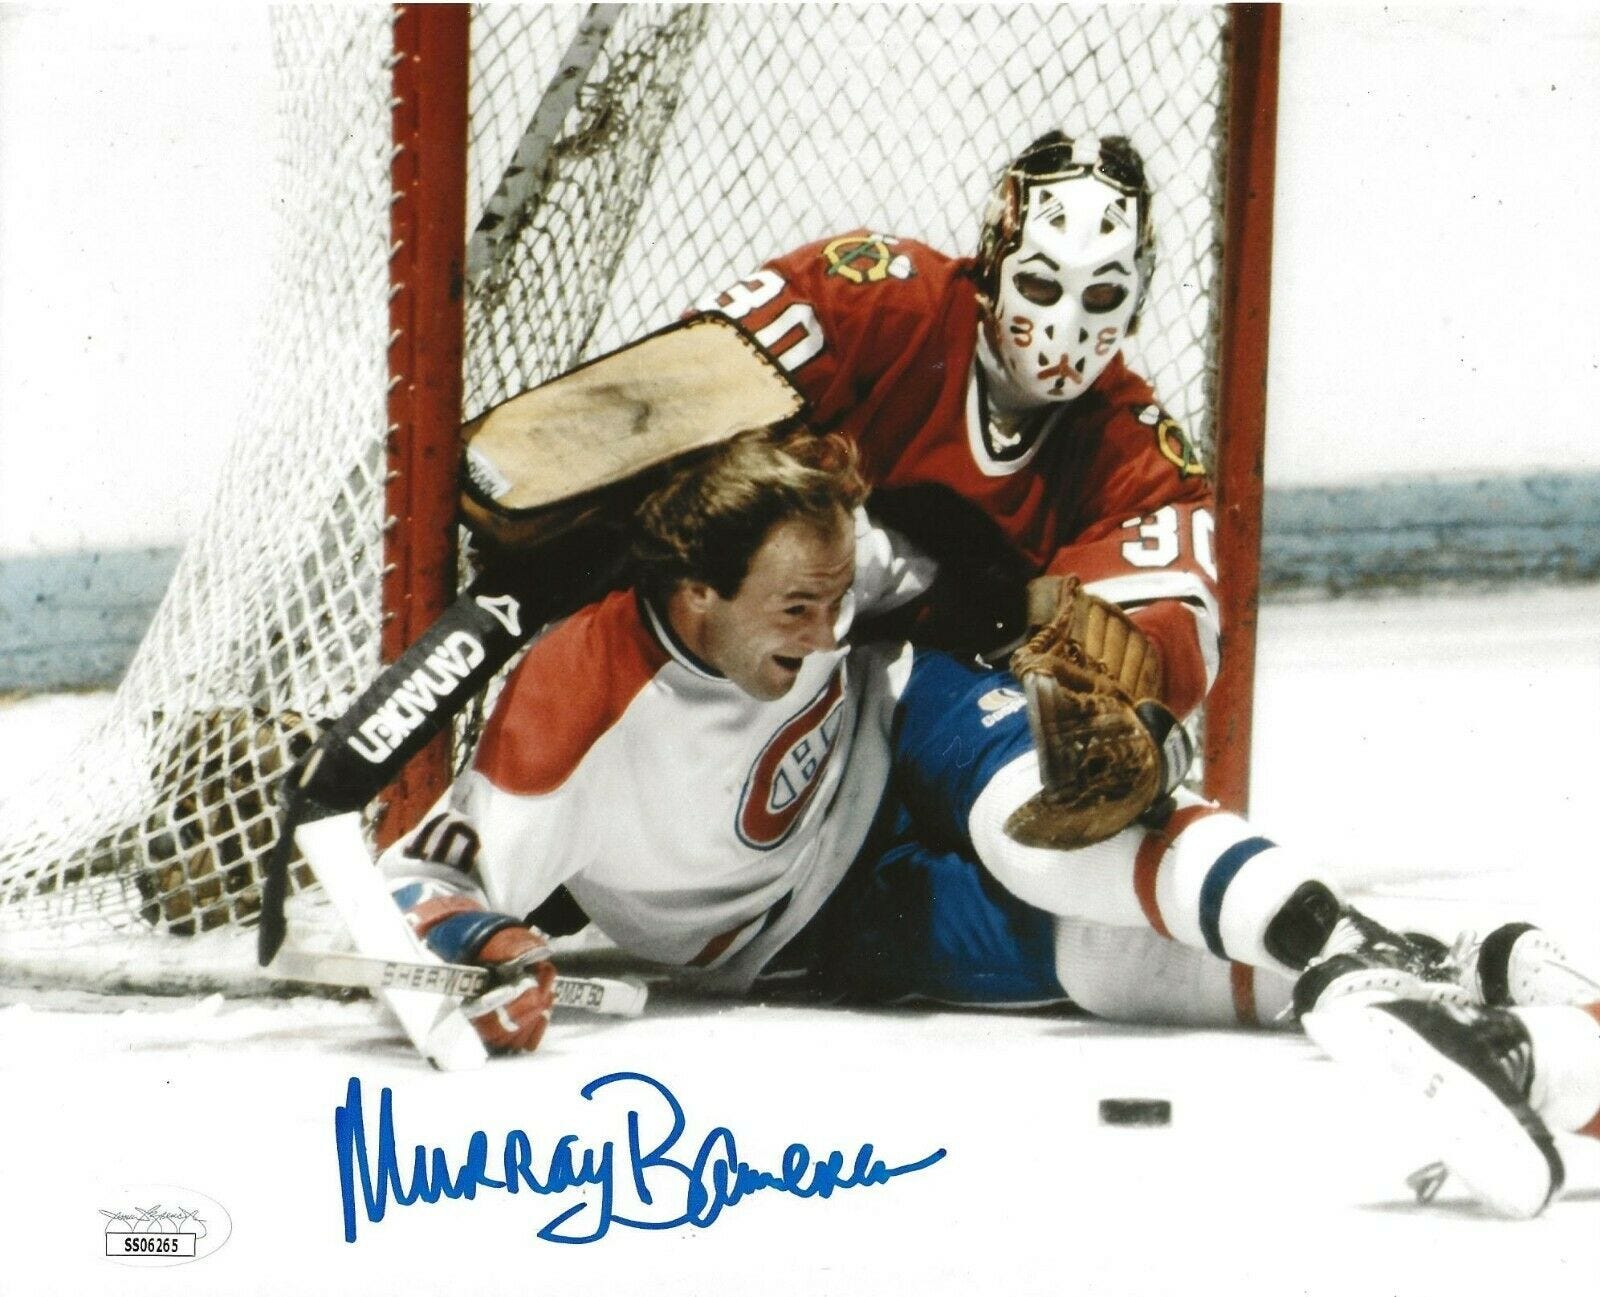 The Best NHL Goalies of the 1980s